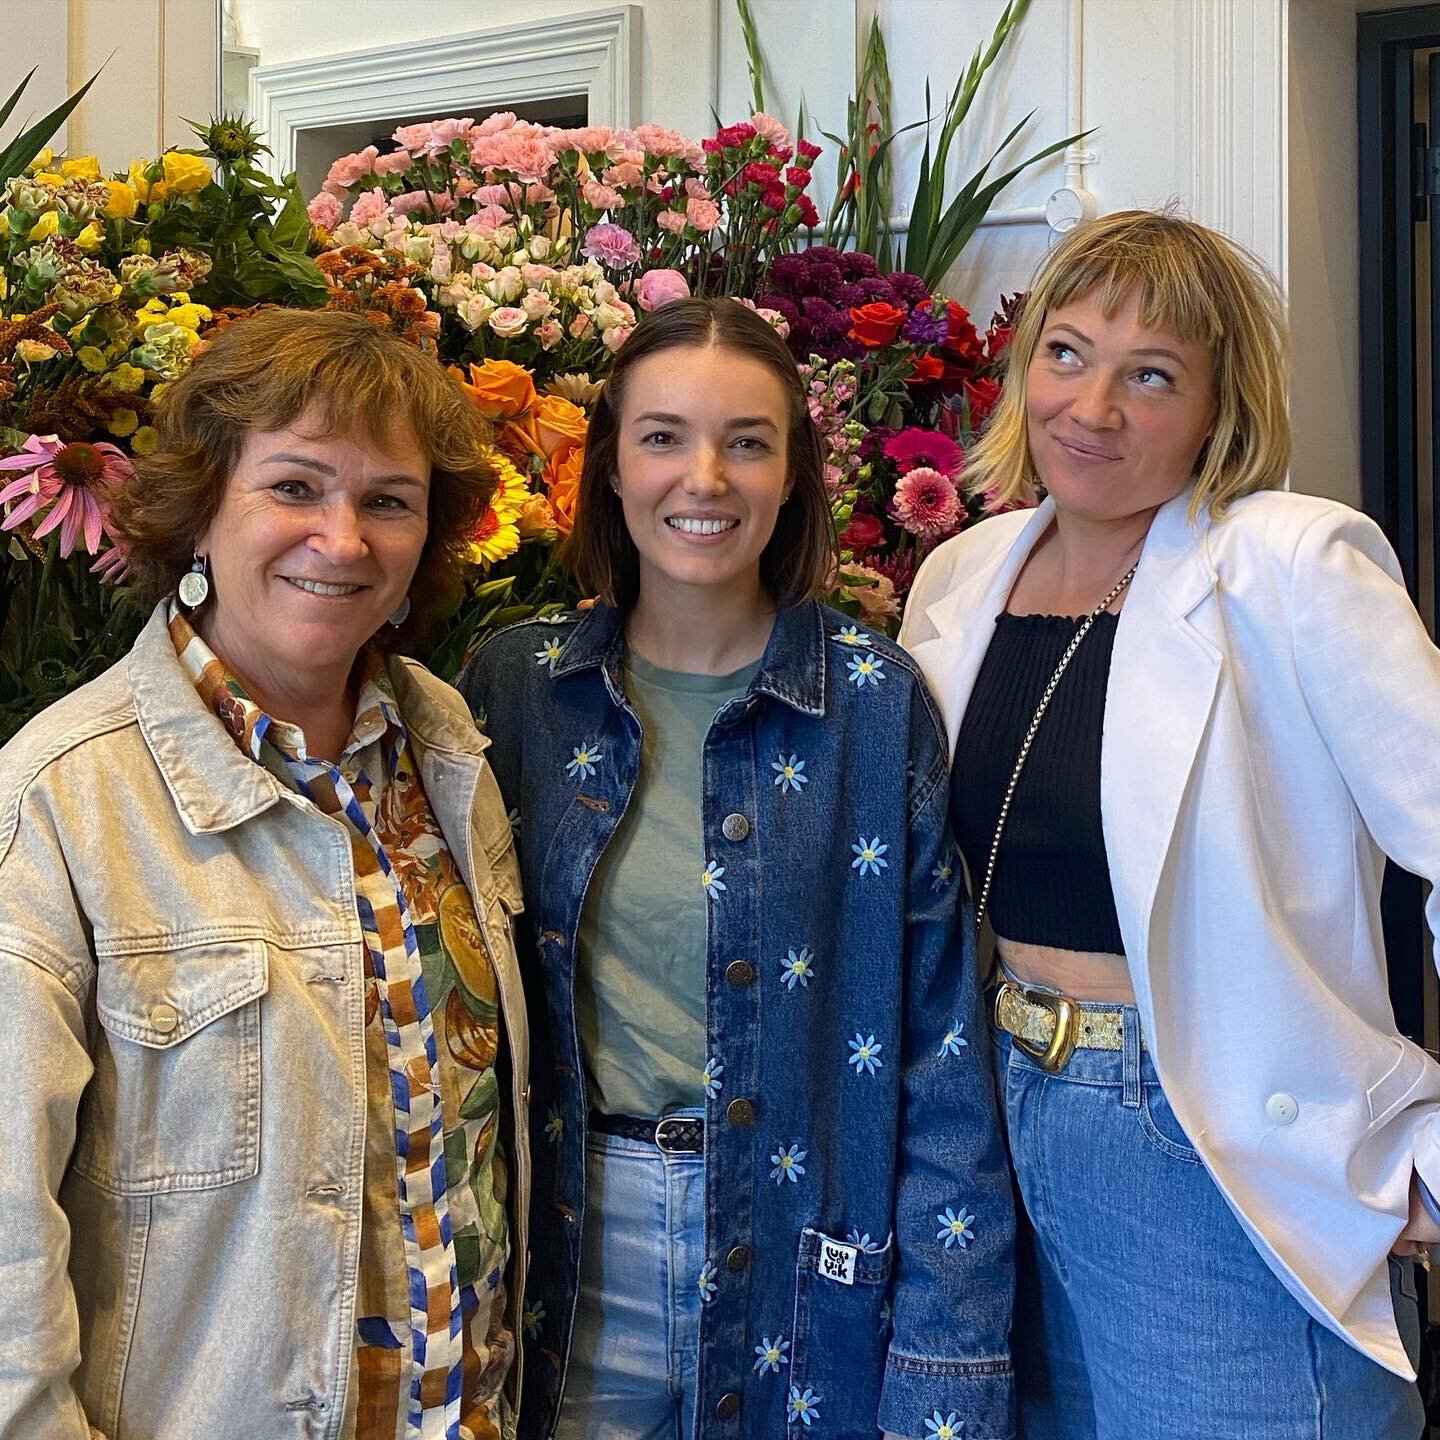 Somethings &lsquo;blooming&rsquo;

Had the best catch up with these two inspirational ladies yesterday. Watch this space

@lararose_botanicalstylist 
@foxandrabbit_ 

Follow for updates 
@gather_afloralexhibition